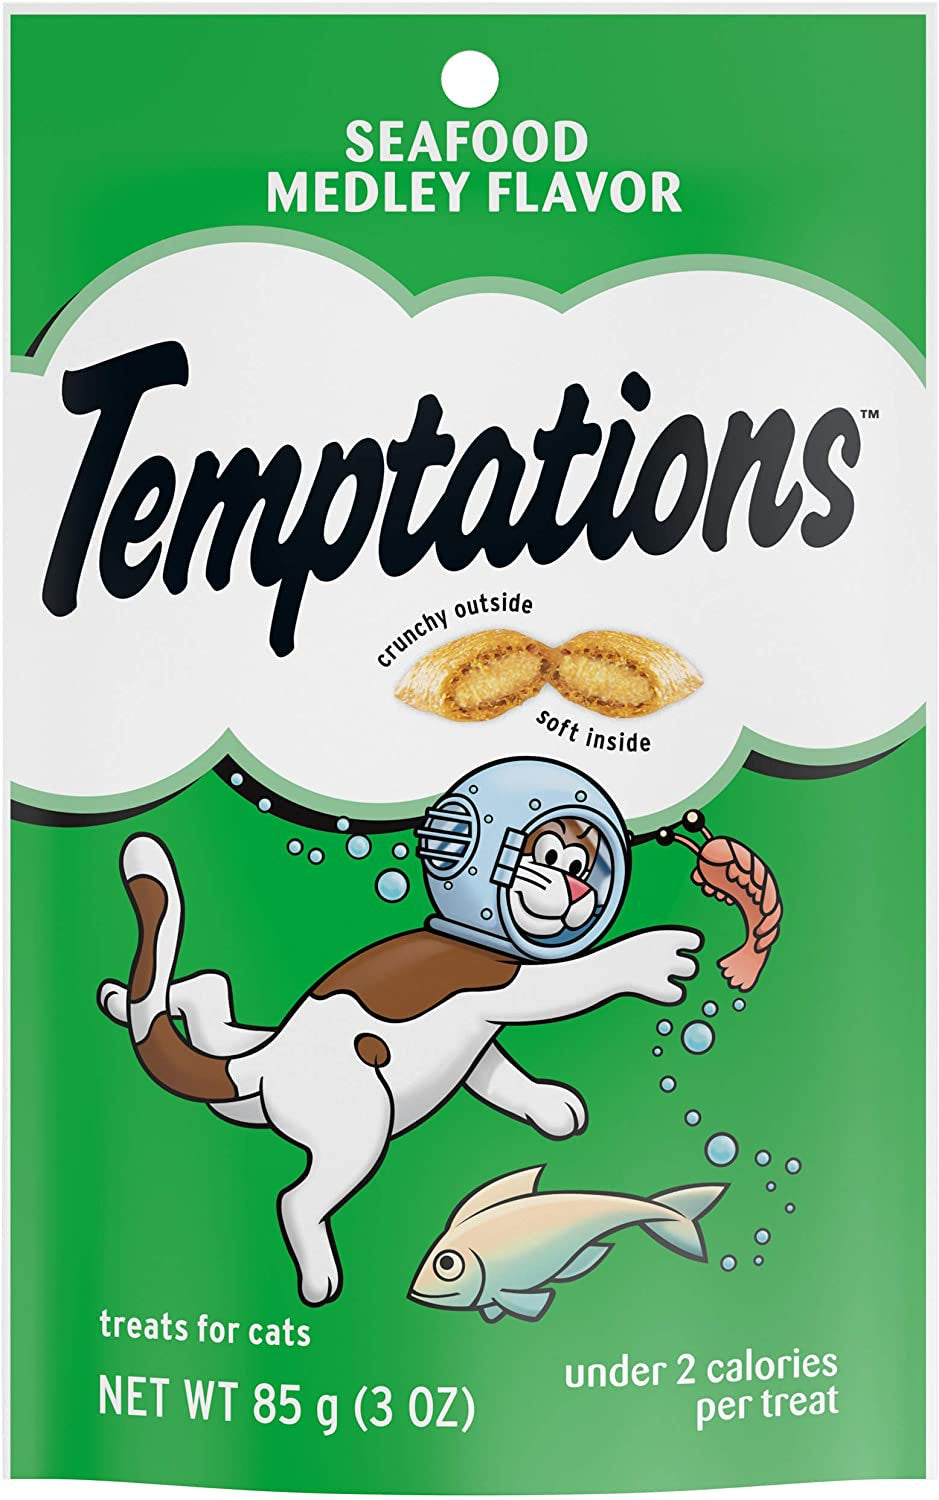 Temptations Cat Treats Variety Pack, Bundle of 7 Flavors (Chicken, Tuna, Salmon, Turkey, Beef, Creamy Dairy and Seafood Medley) with a Pair of Cat Grooming Gloves